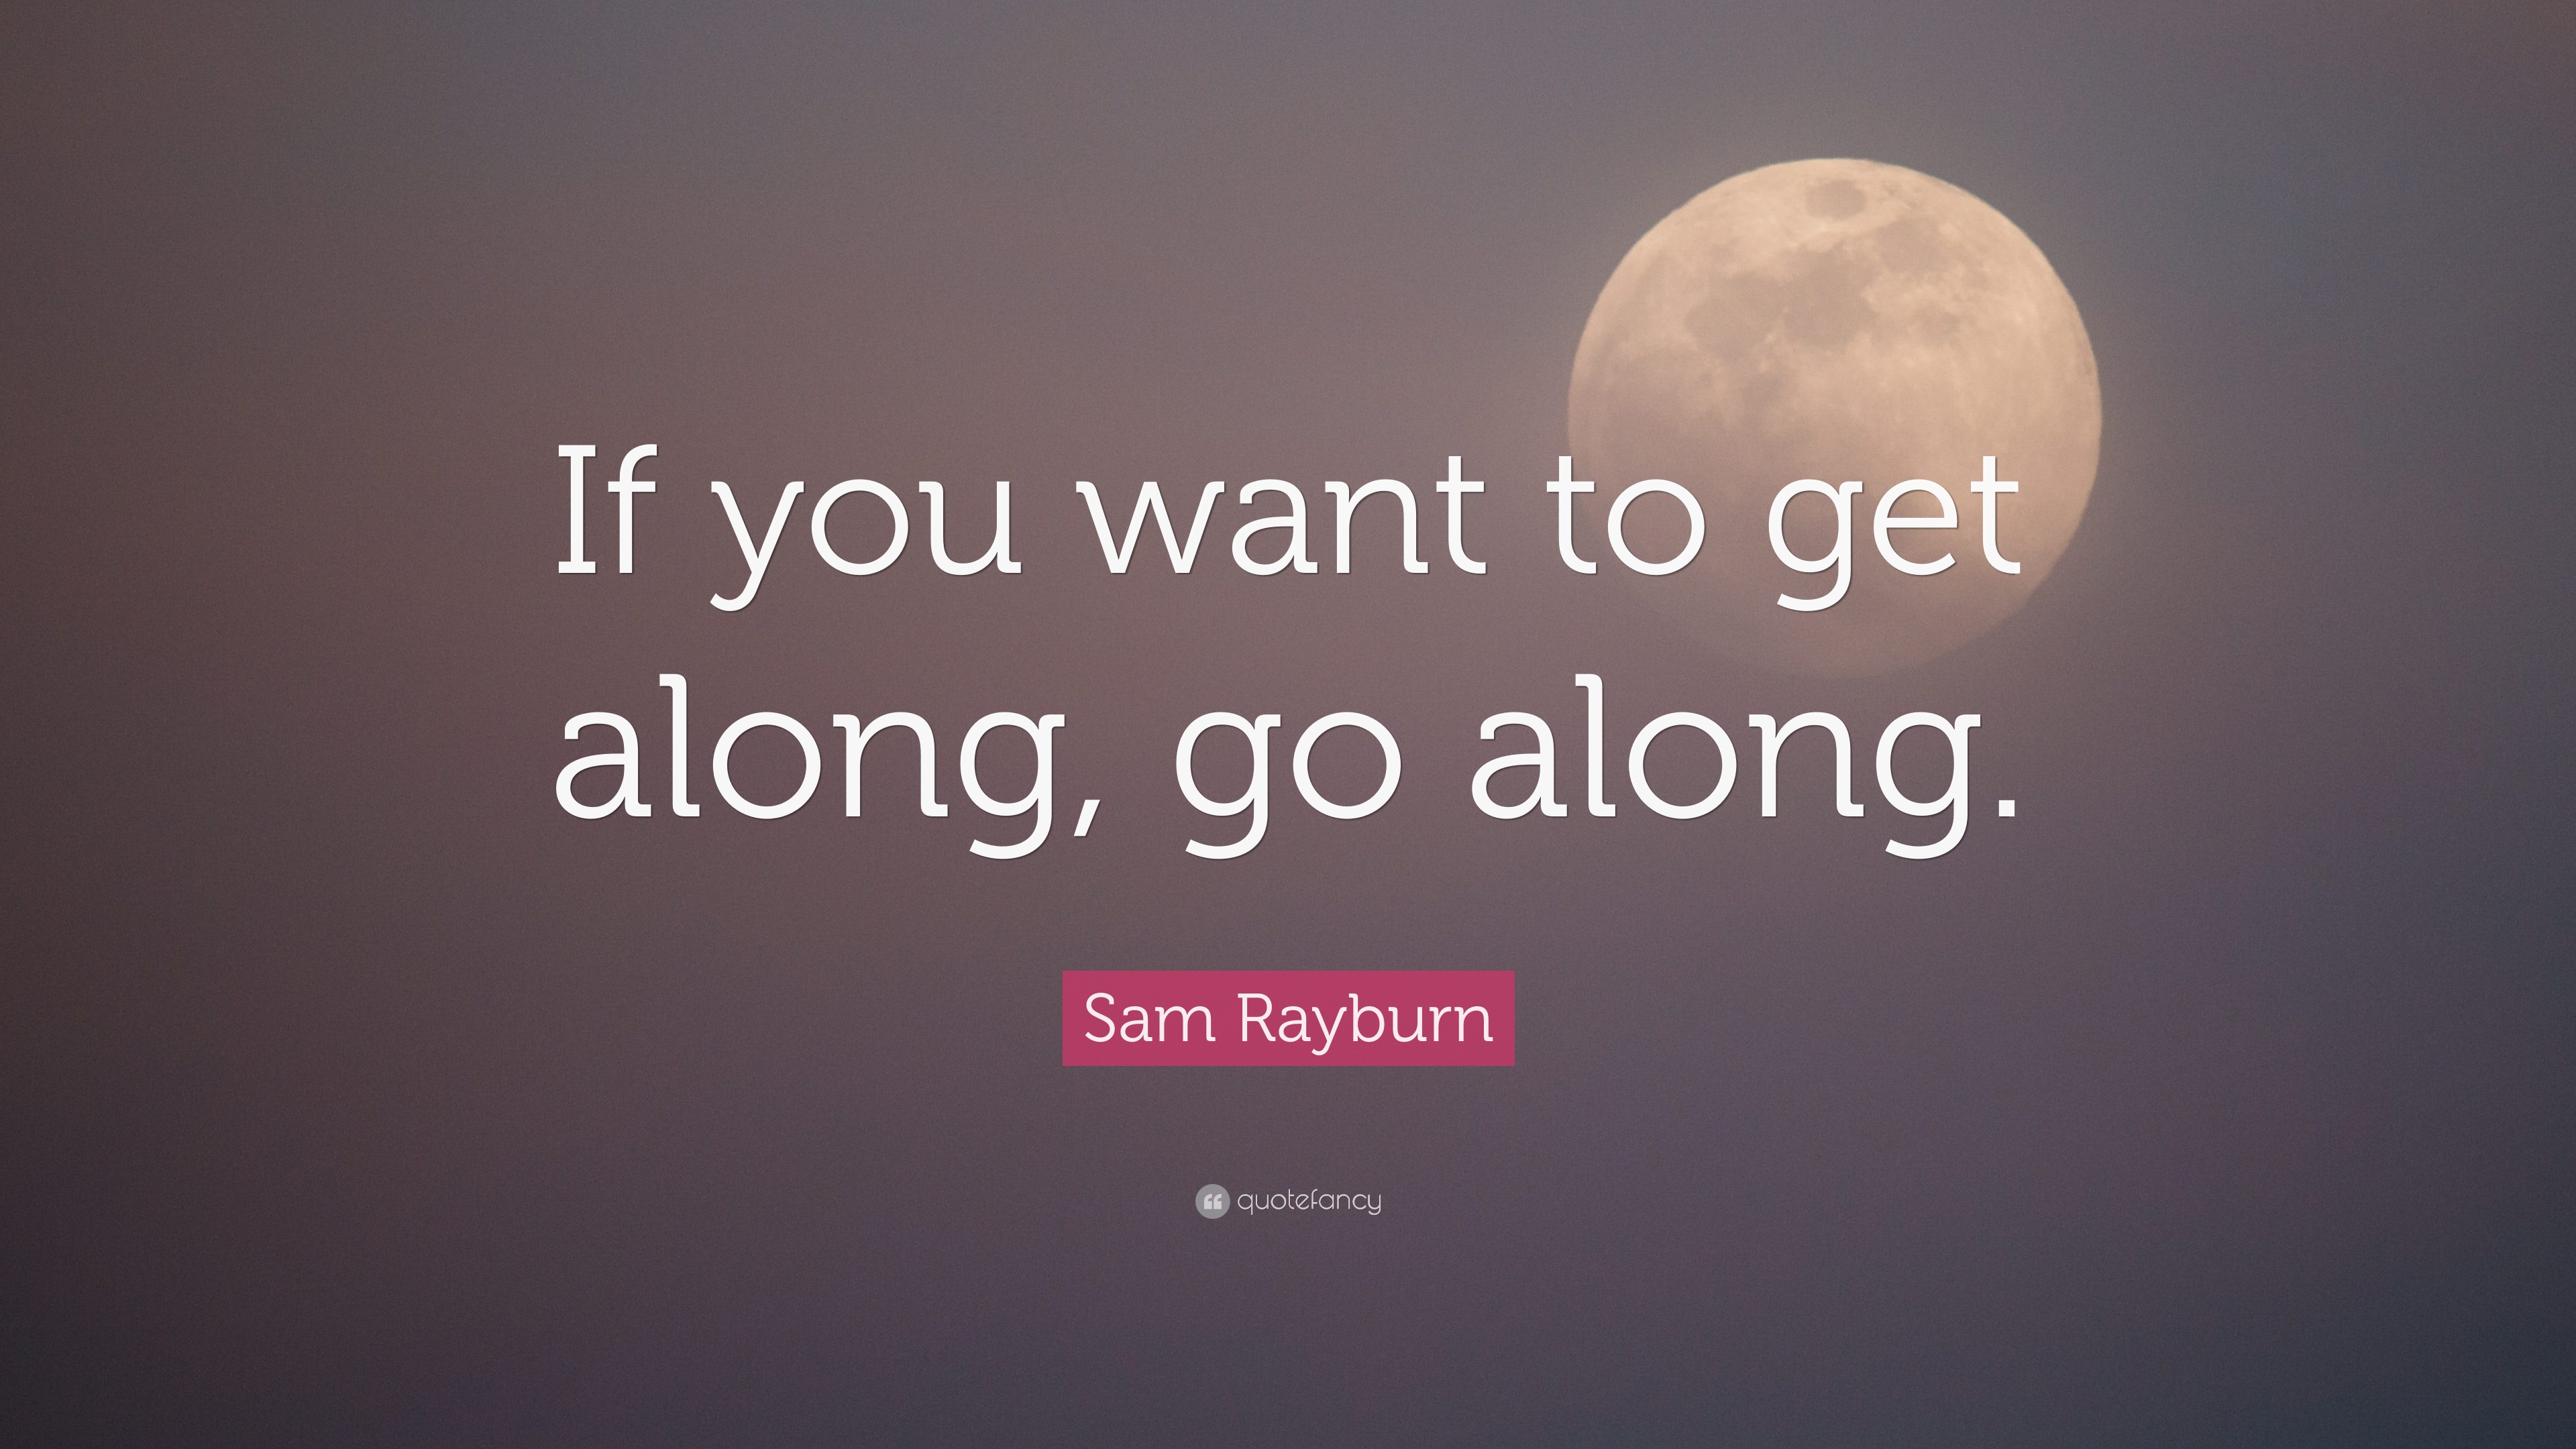 Sam Rayburn Quote: “If you want to get along, go along.”